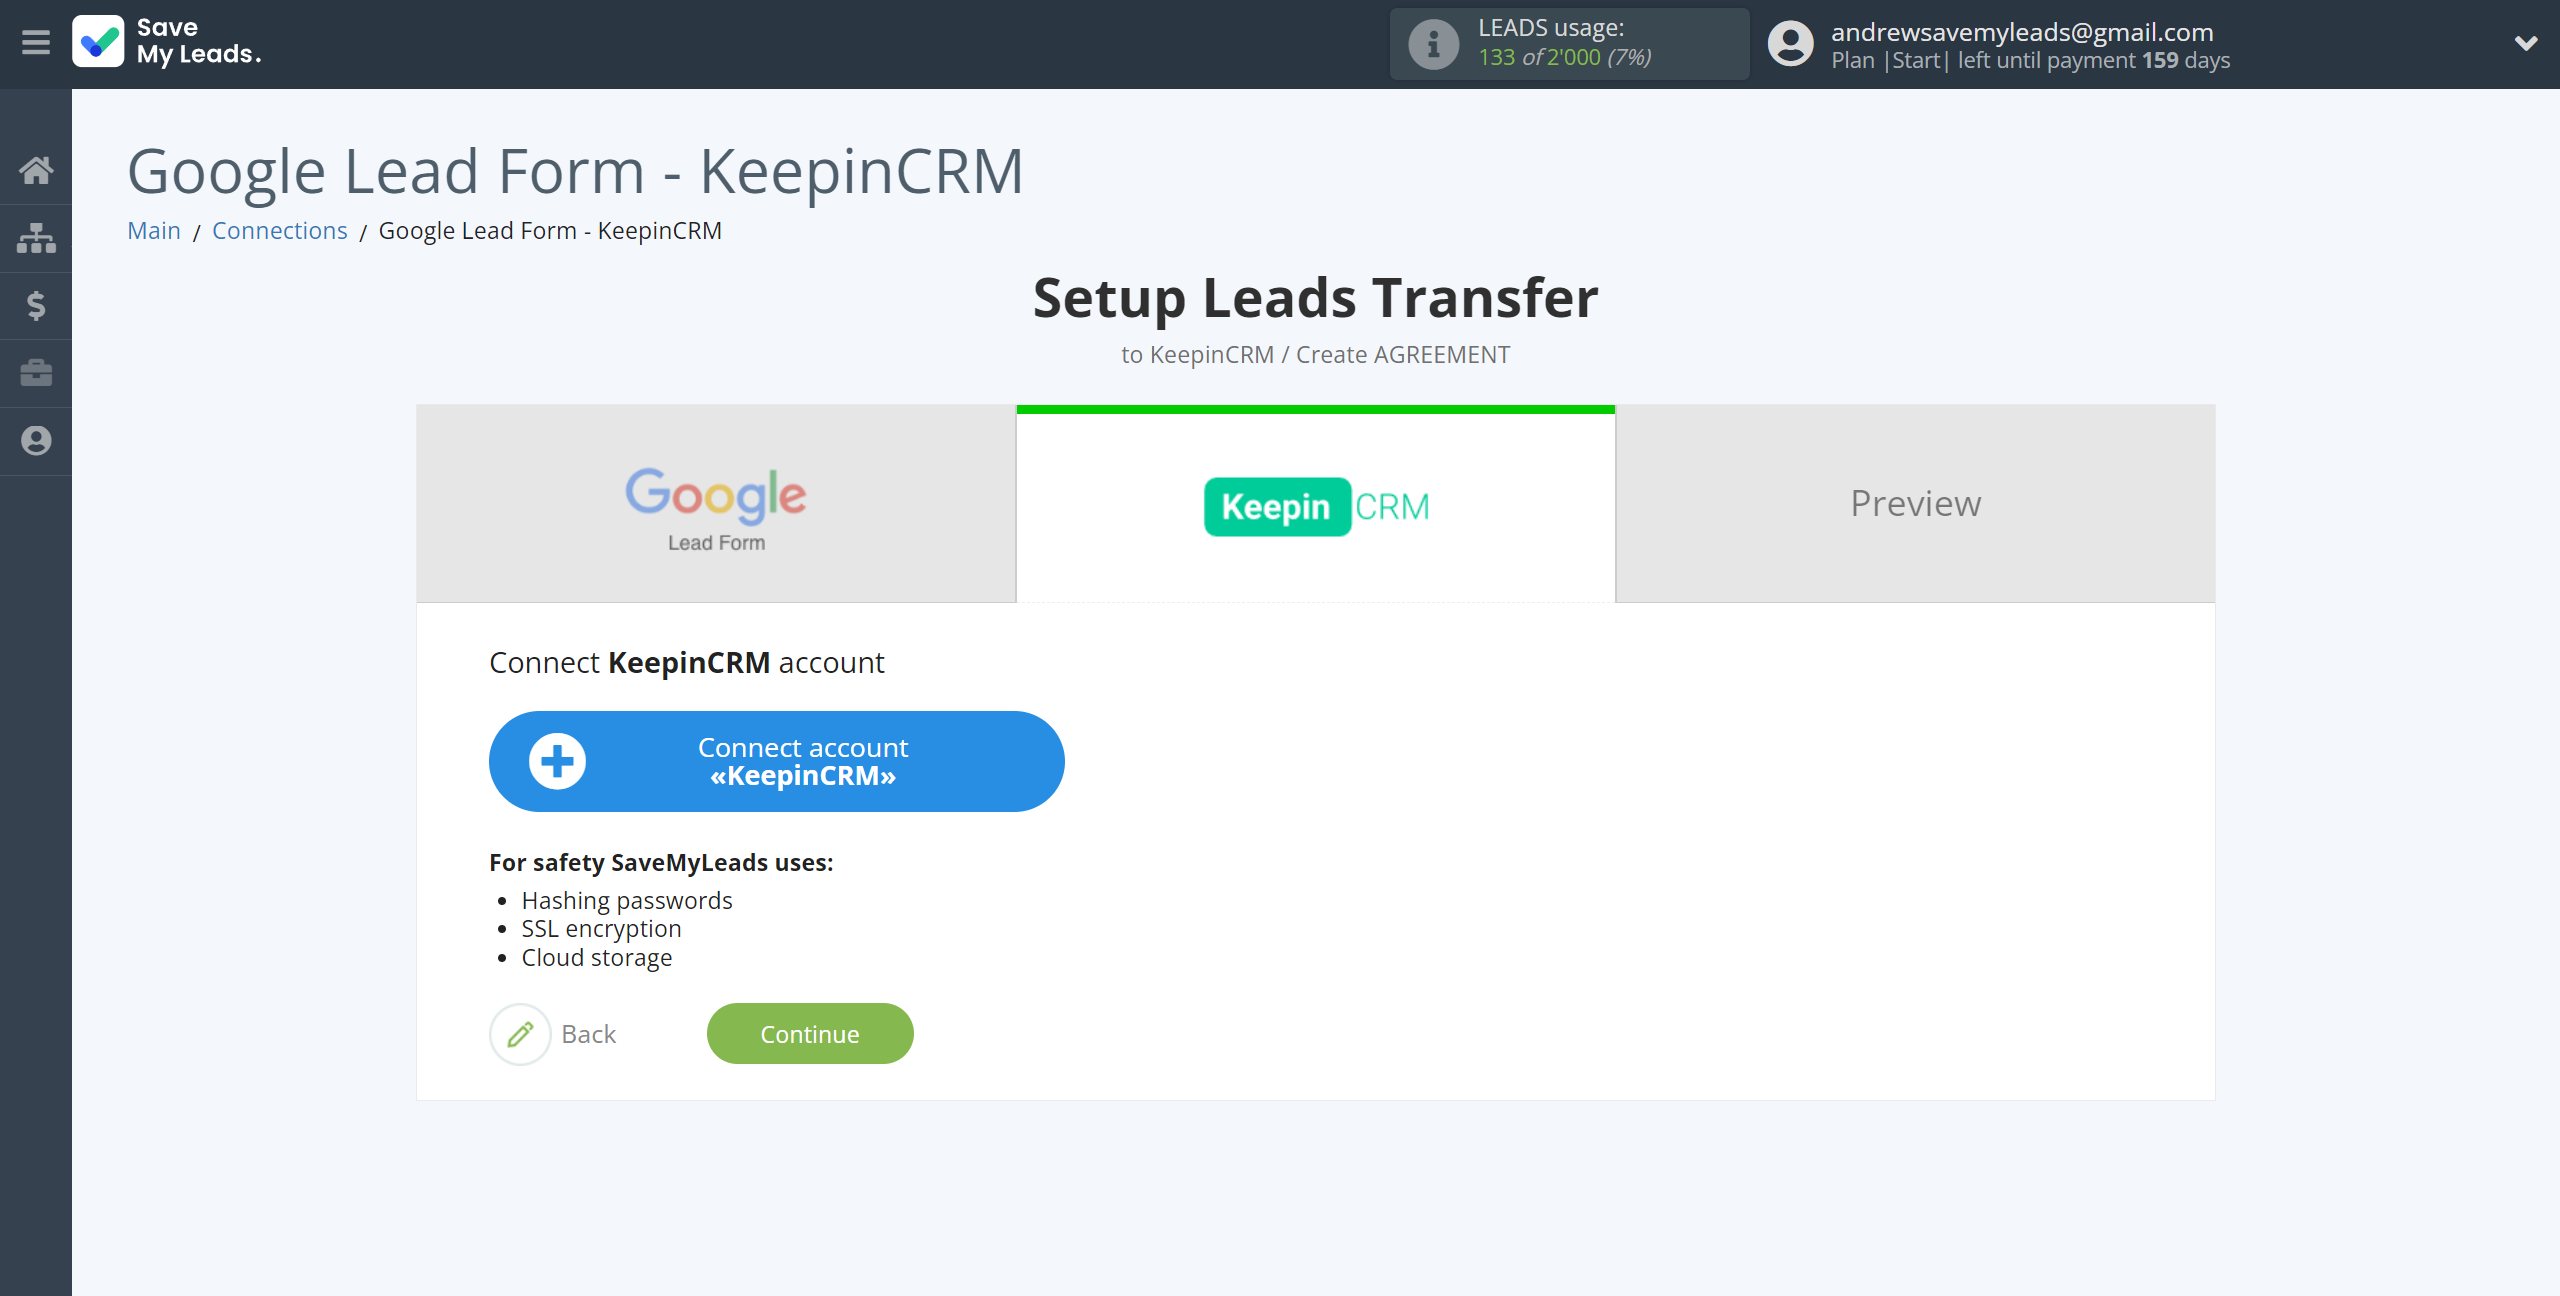 How to Connect Google Lead Form with KeepinCRM Create Agreement | Data Destination account connection